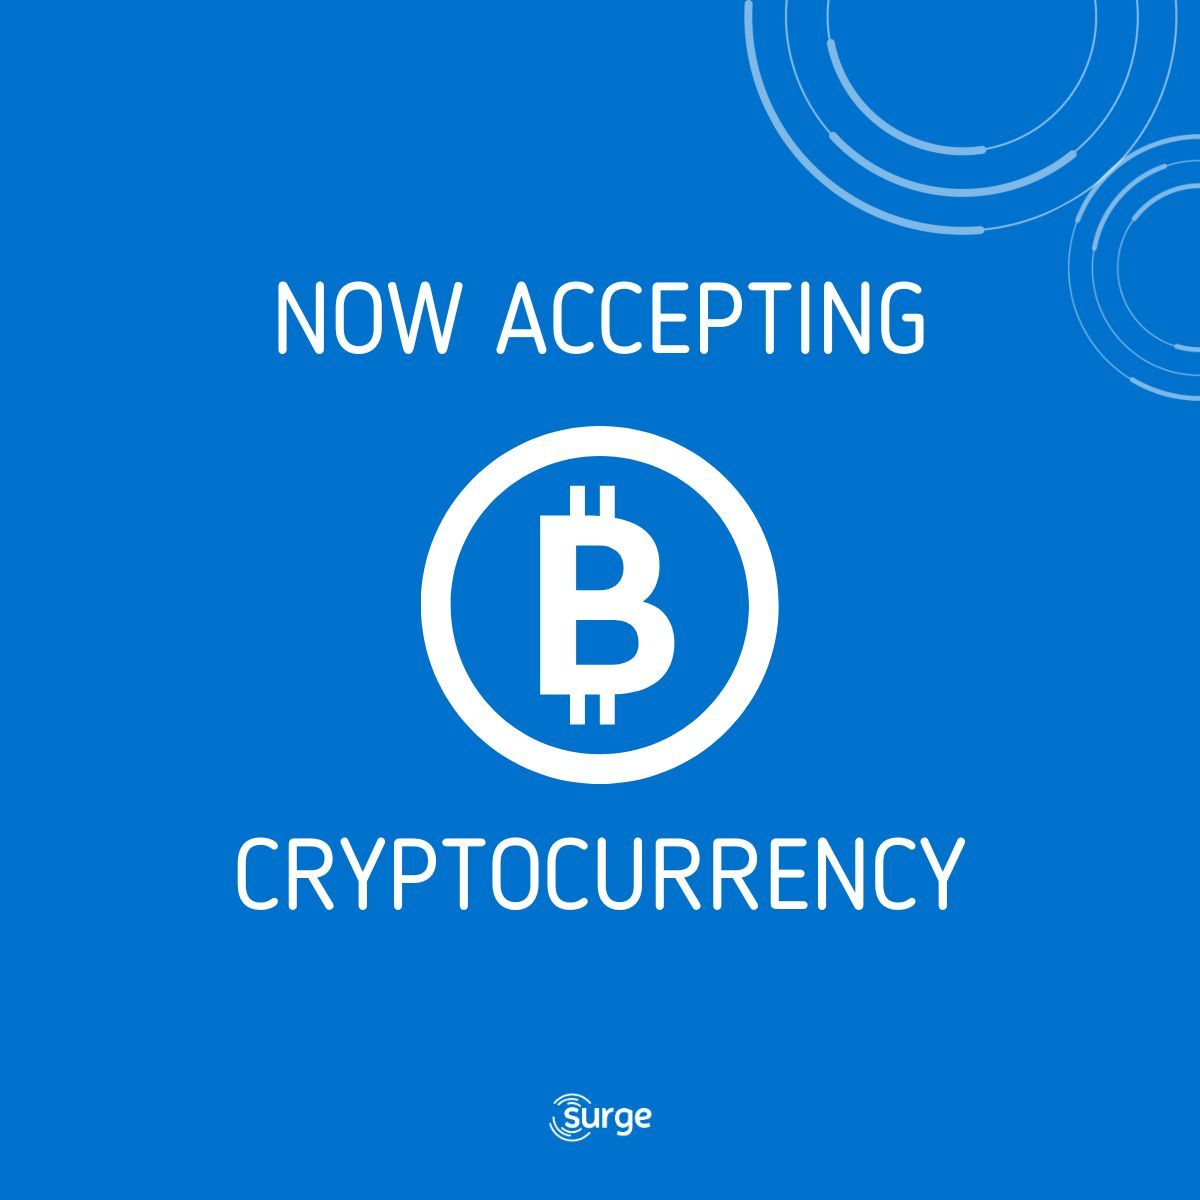 Through @TheGivingBlock, we can now receive over 100 different cryptocurrencies - helping us bring clean water and safe toilets to our global communities. #donatecrypto #cryptodonations #cryptoisgood #cleanwaterforall